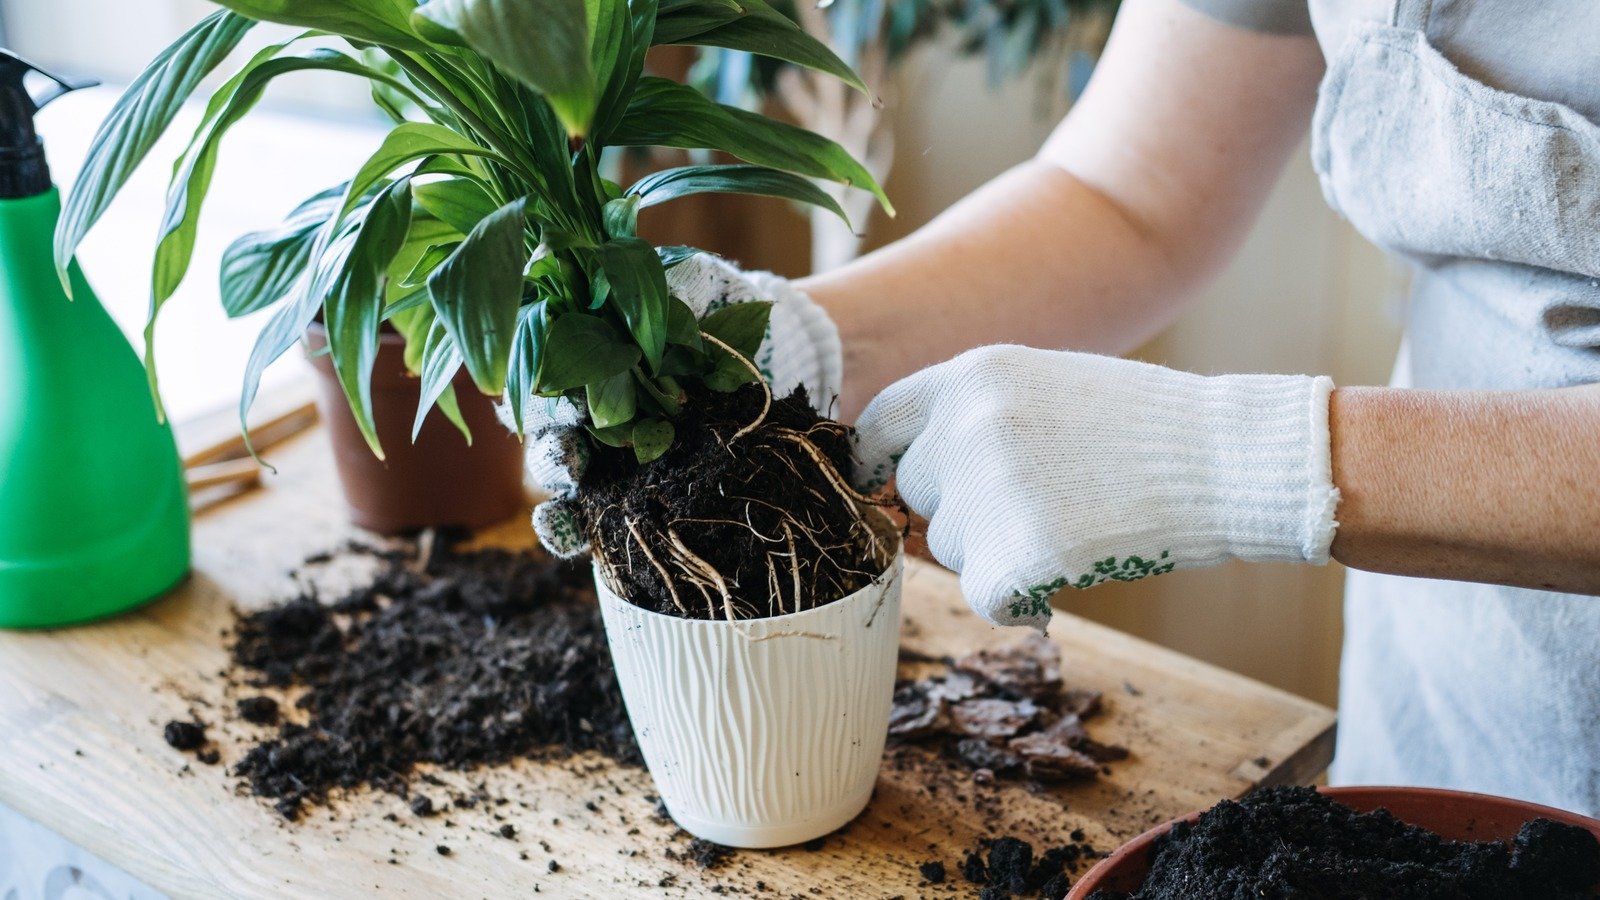 15 Houseplants That Even Beginners Can Grow